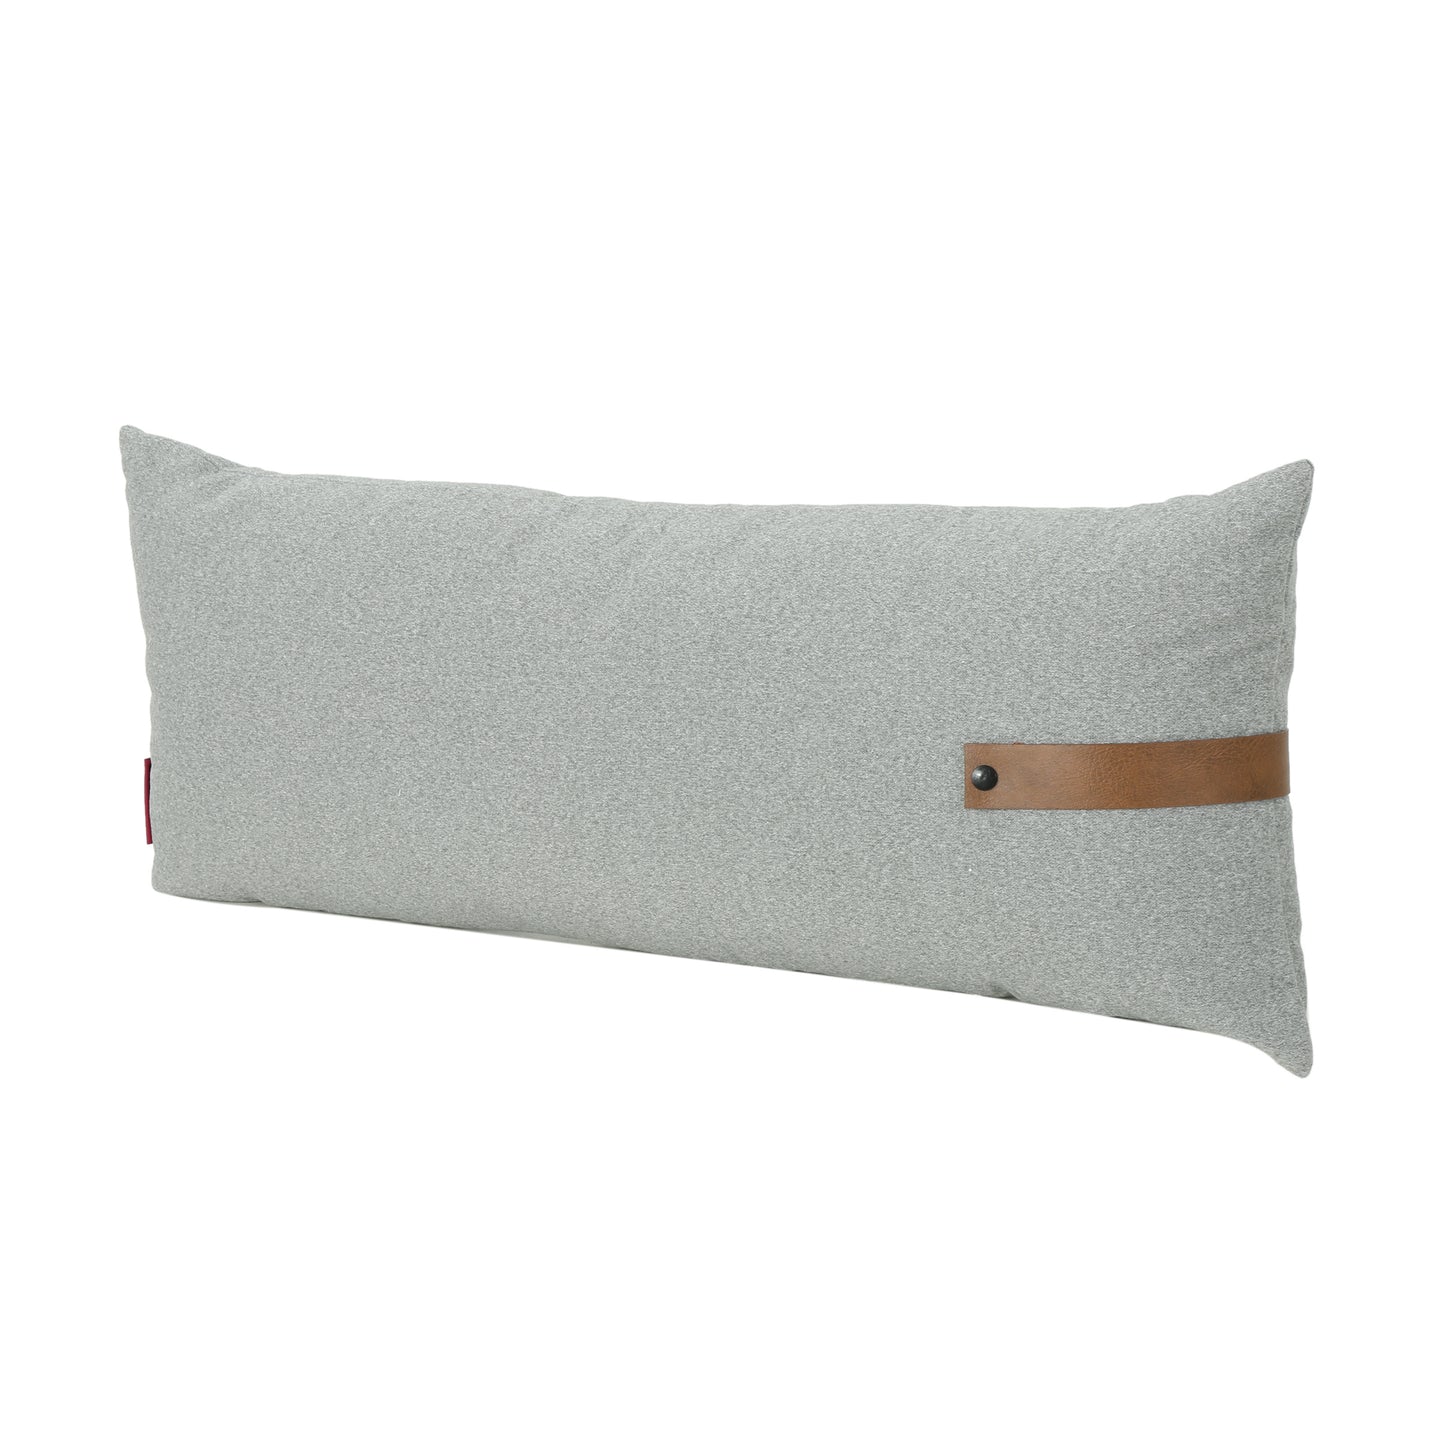 Dunn Mid Century Rectangular Fabric Pillow with Faux Leather Strap (Set of 2)